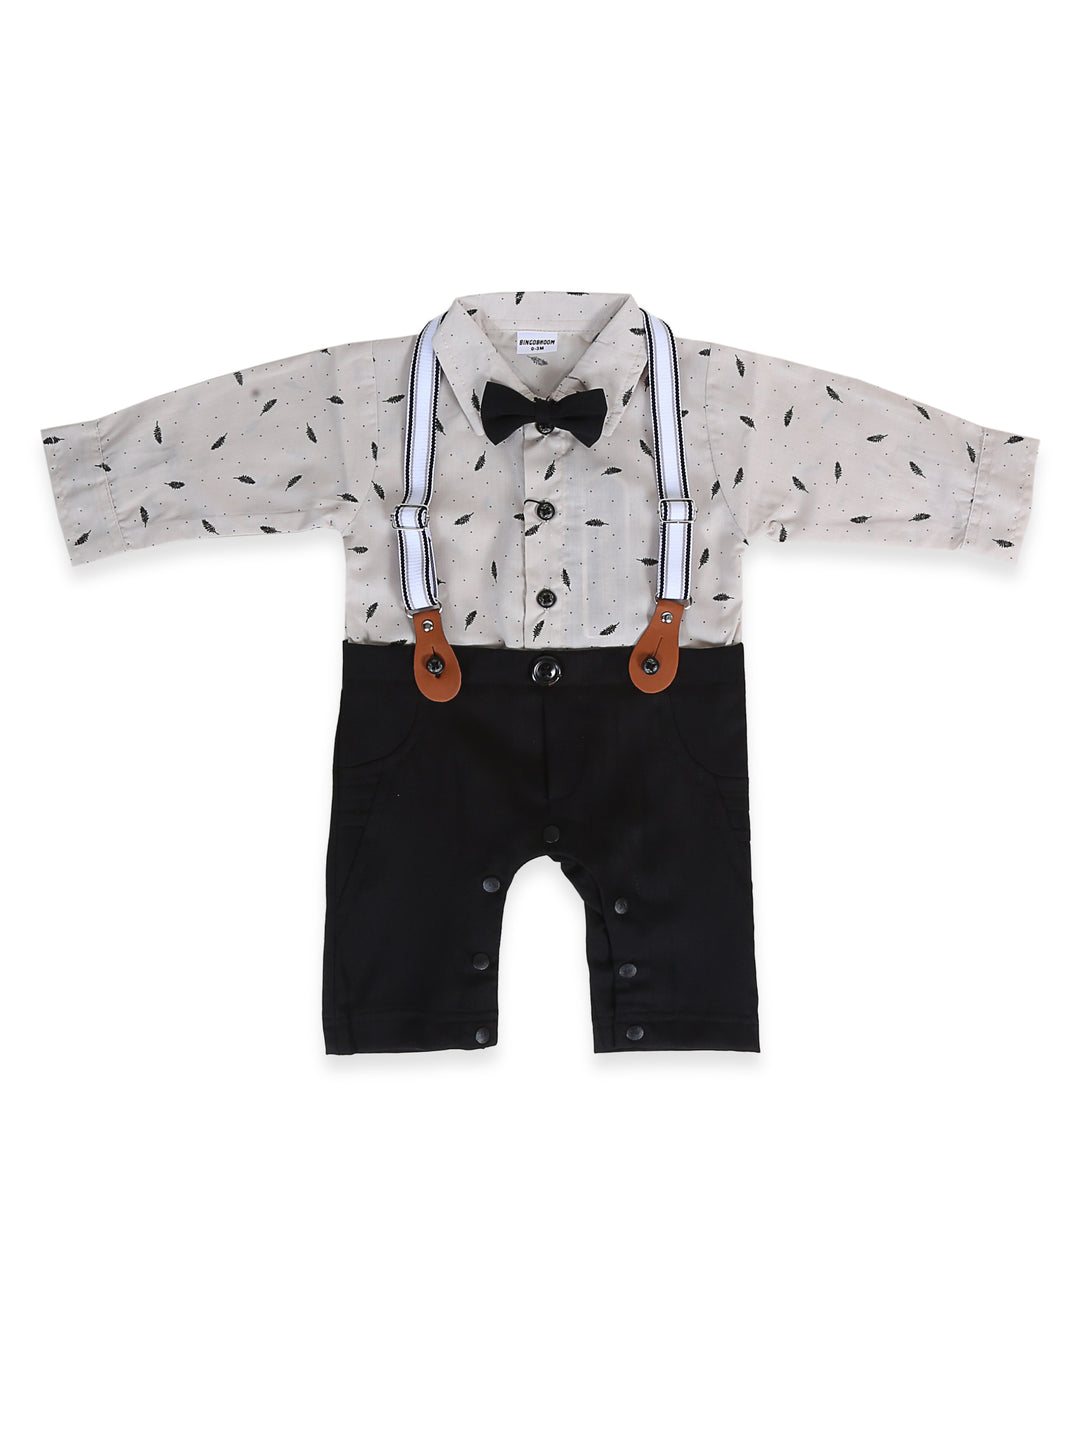 Bingobhoom Boys H/S Romper With Gallace #389 (S-24)